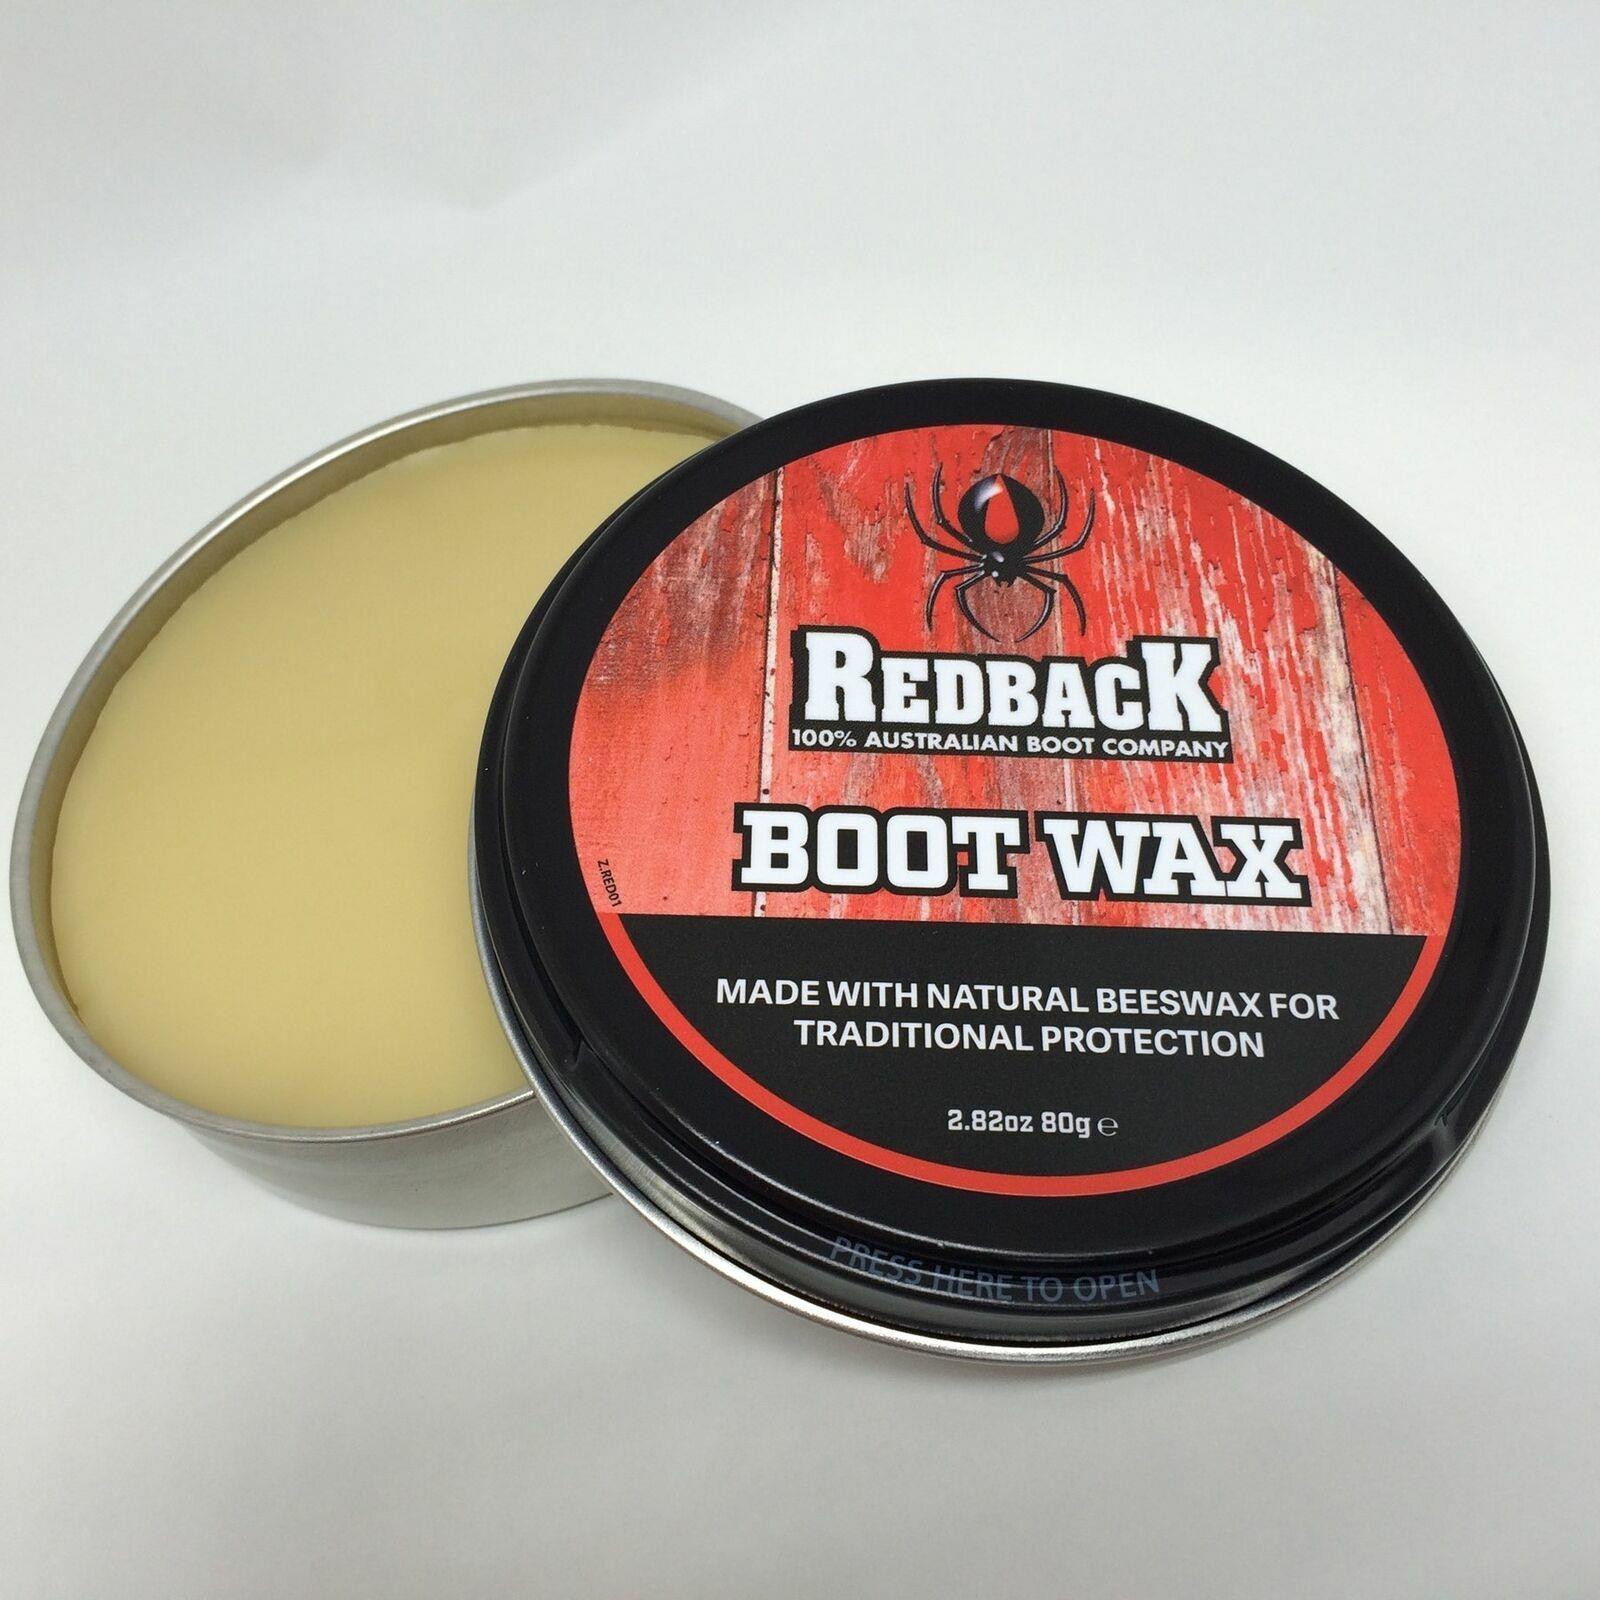 REDBACK UWAX beeswax waterproofing & leather conditioner - 80g tin